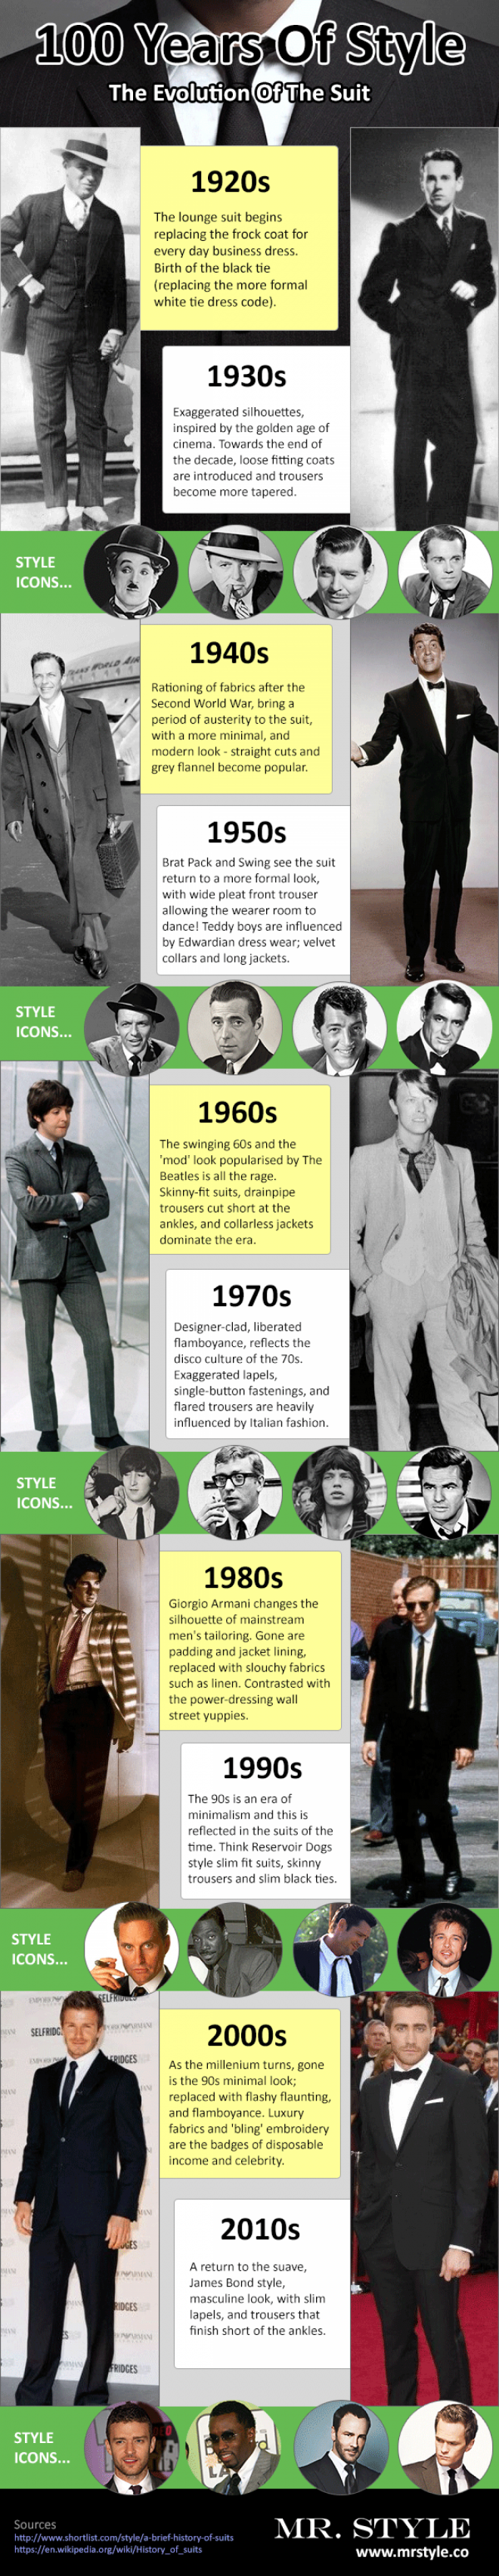 How men's clothing has changed over the past 100 years.